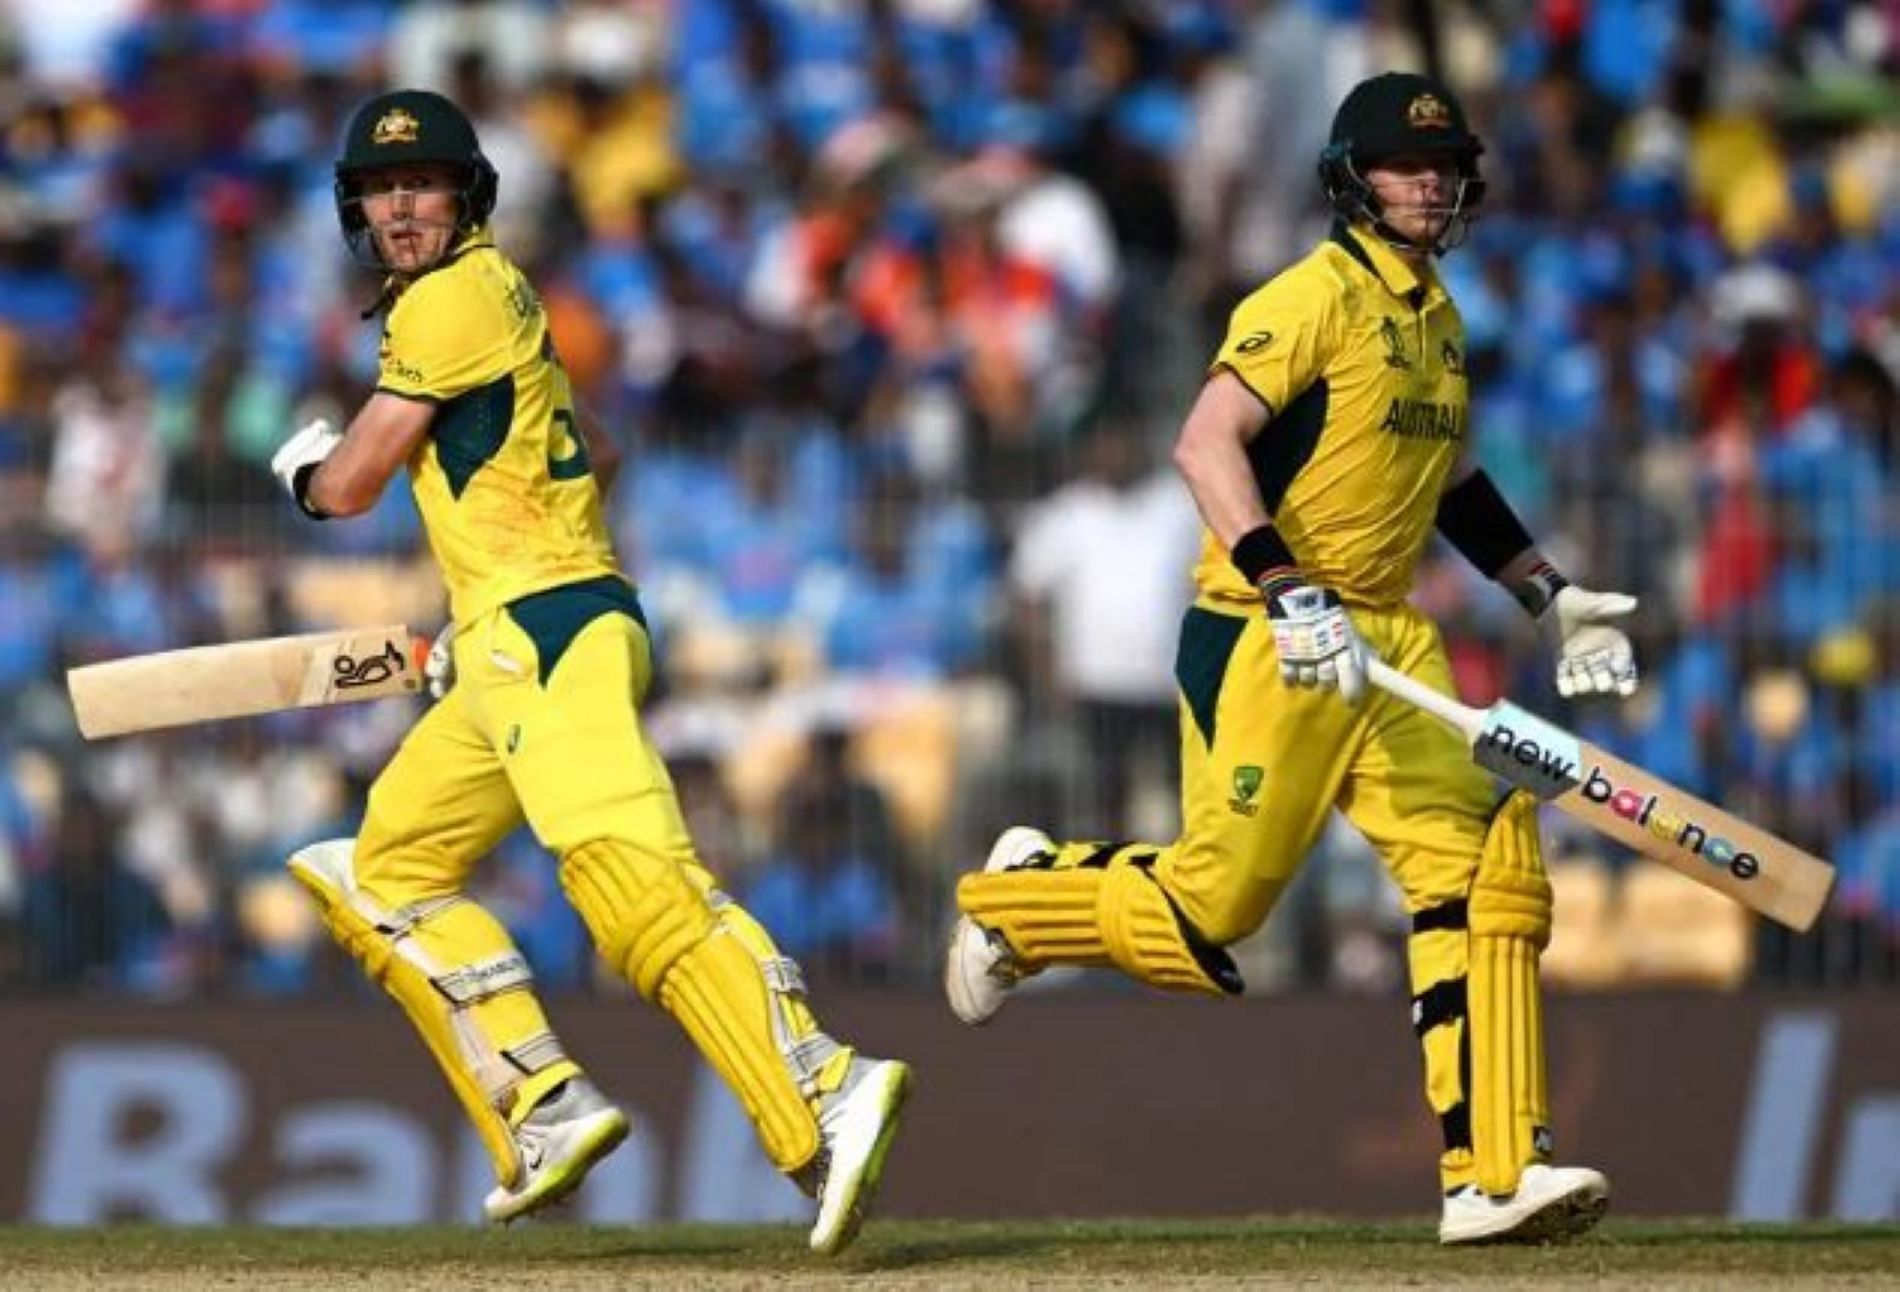 Smith and Labuschagne have struggled to score at a good clip in the World Cup